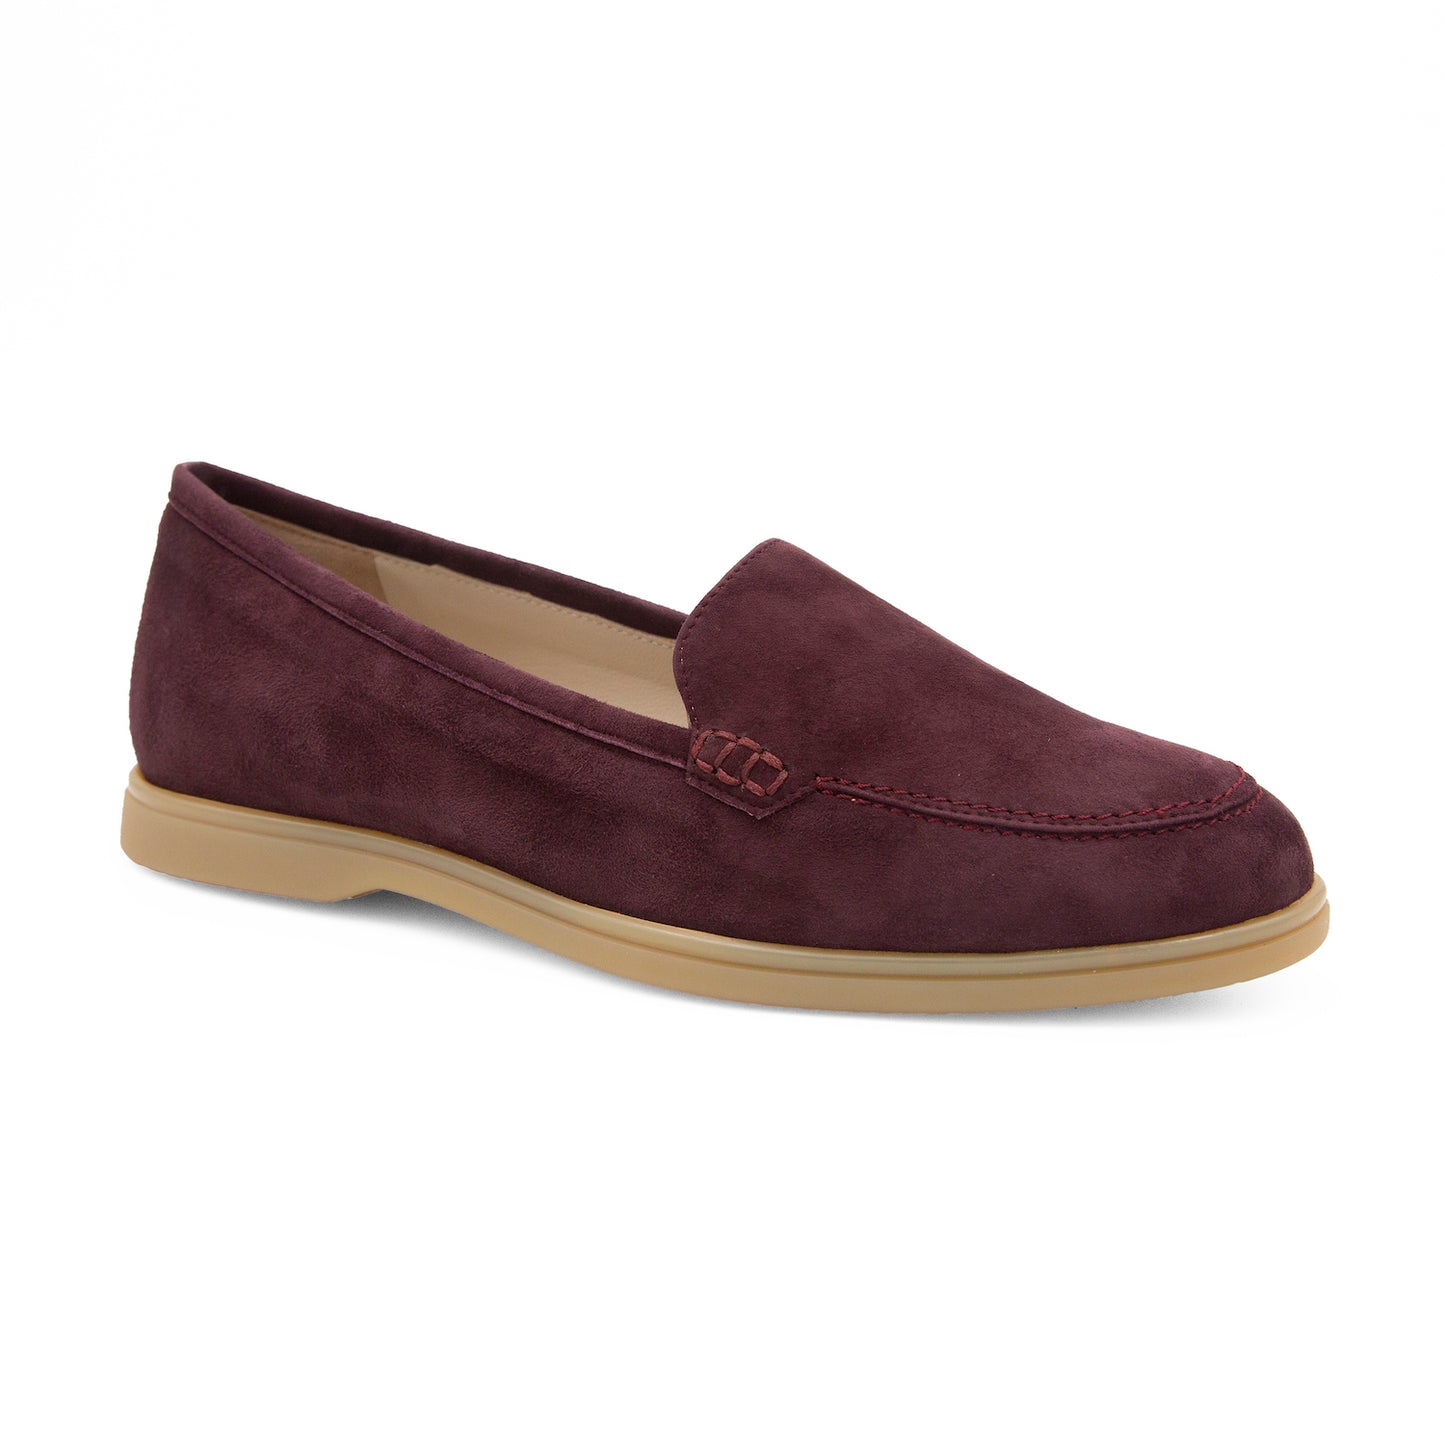 Rombo Loafer Prug Csh/Bei Sole